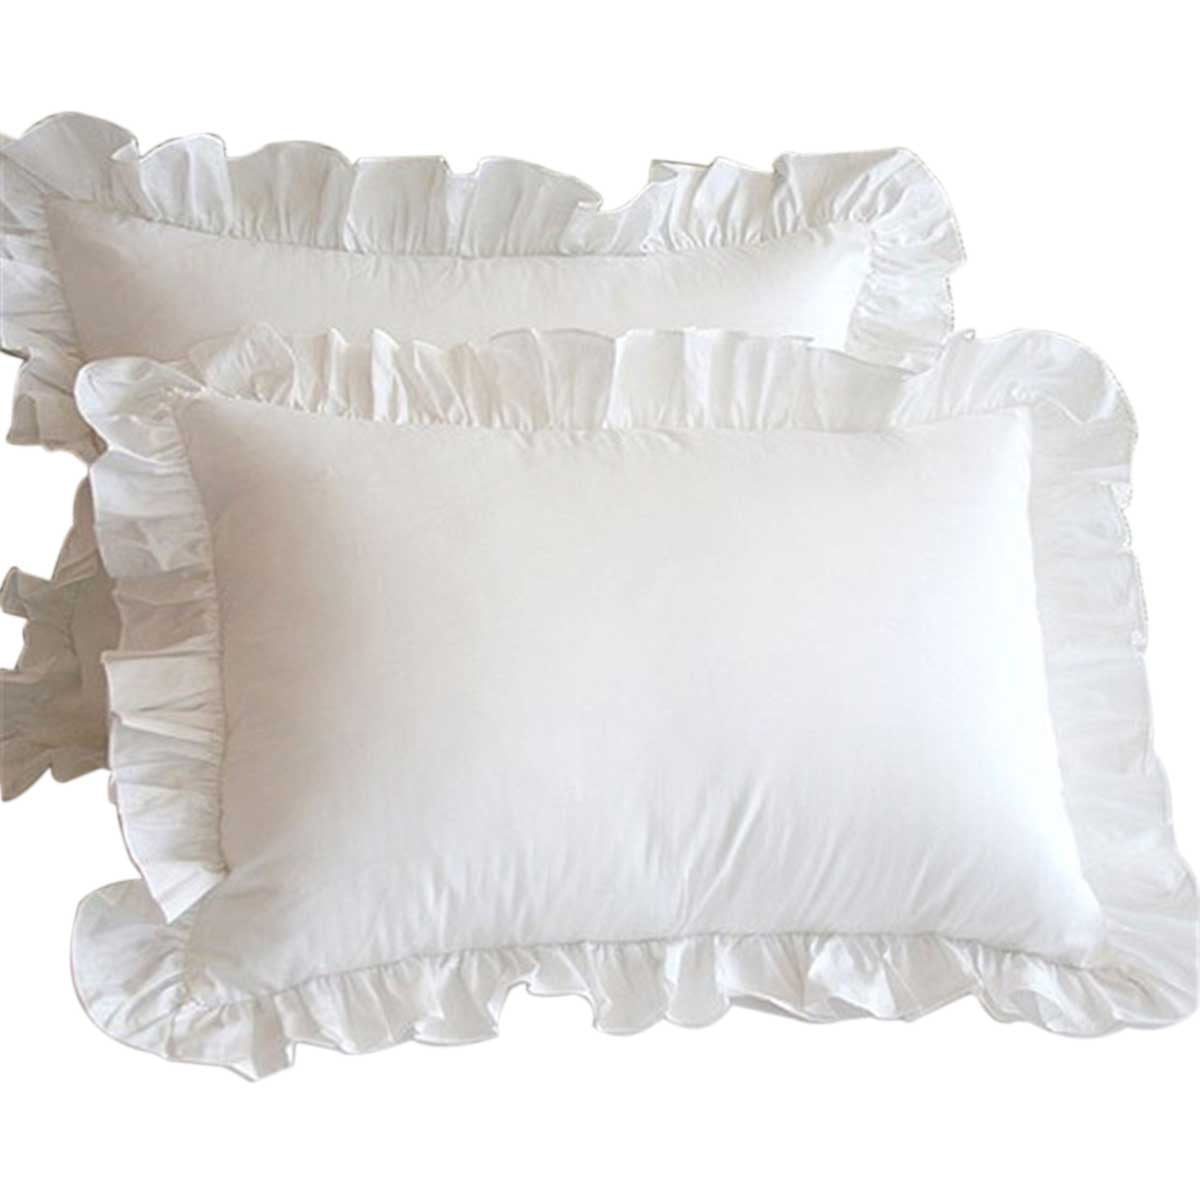 Roses White Standard Pillow Cases Ruffle & Lace Cottage Chic 1PC Pillow Cover 